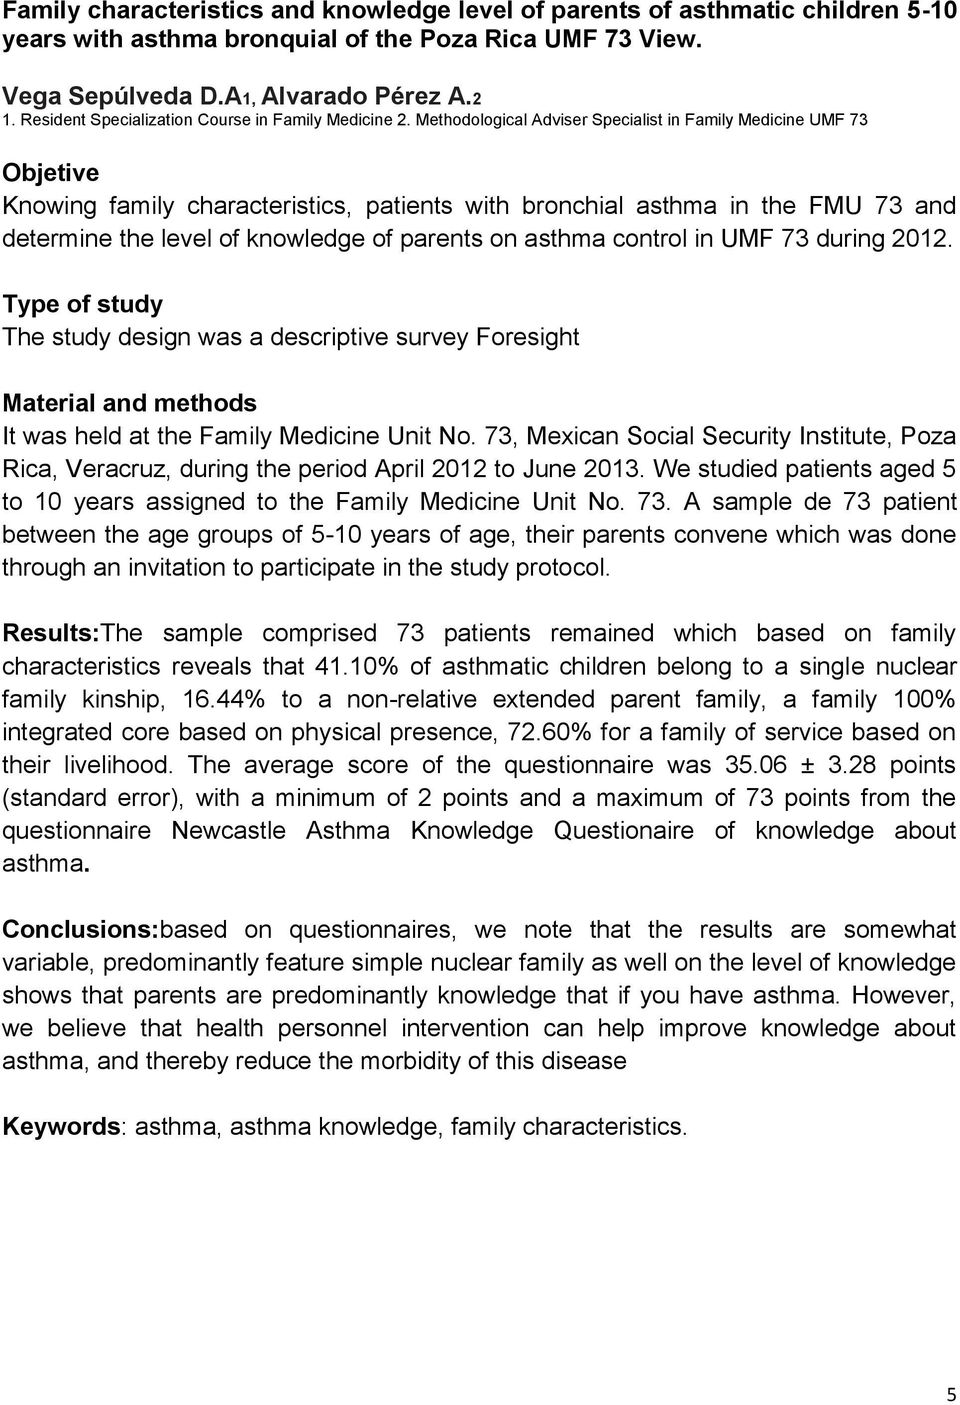 Methodological Adviser Specialist in Family Medicine UMF 73 Objetive Knowing family characteristics, patients with bronchial asthma in the FMU 73 and determine the level of knowledge of parents on